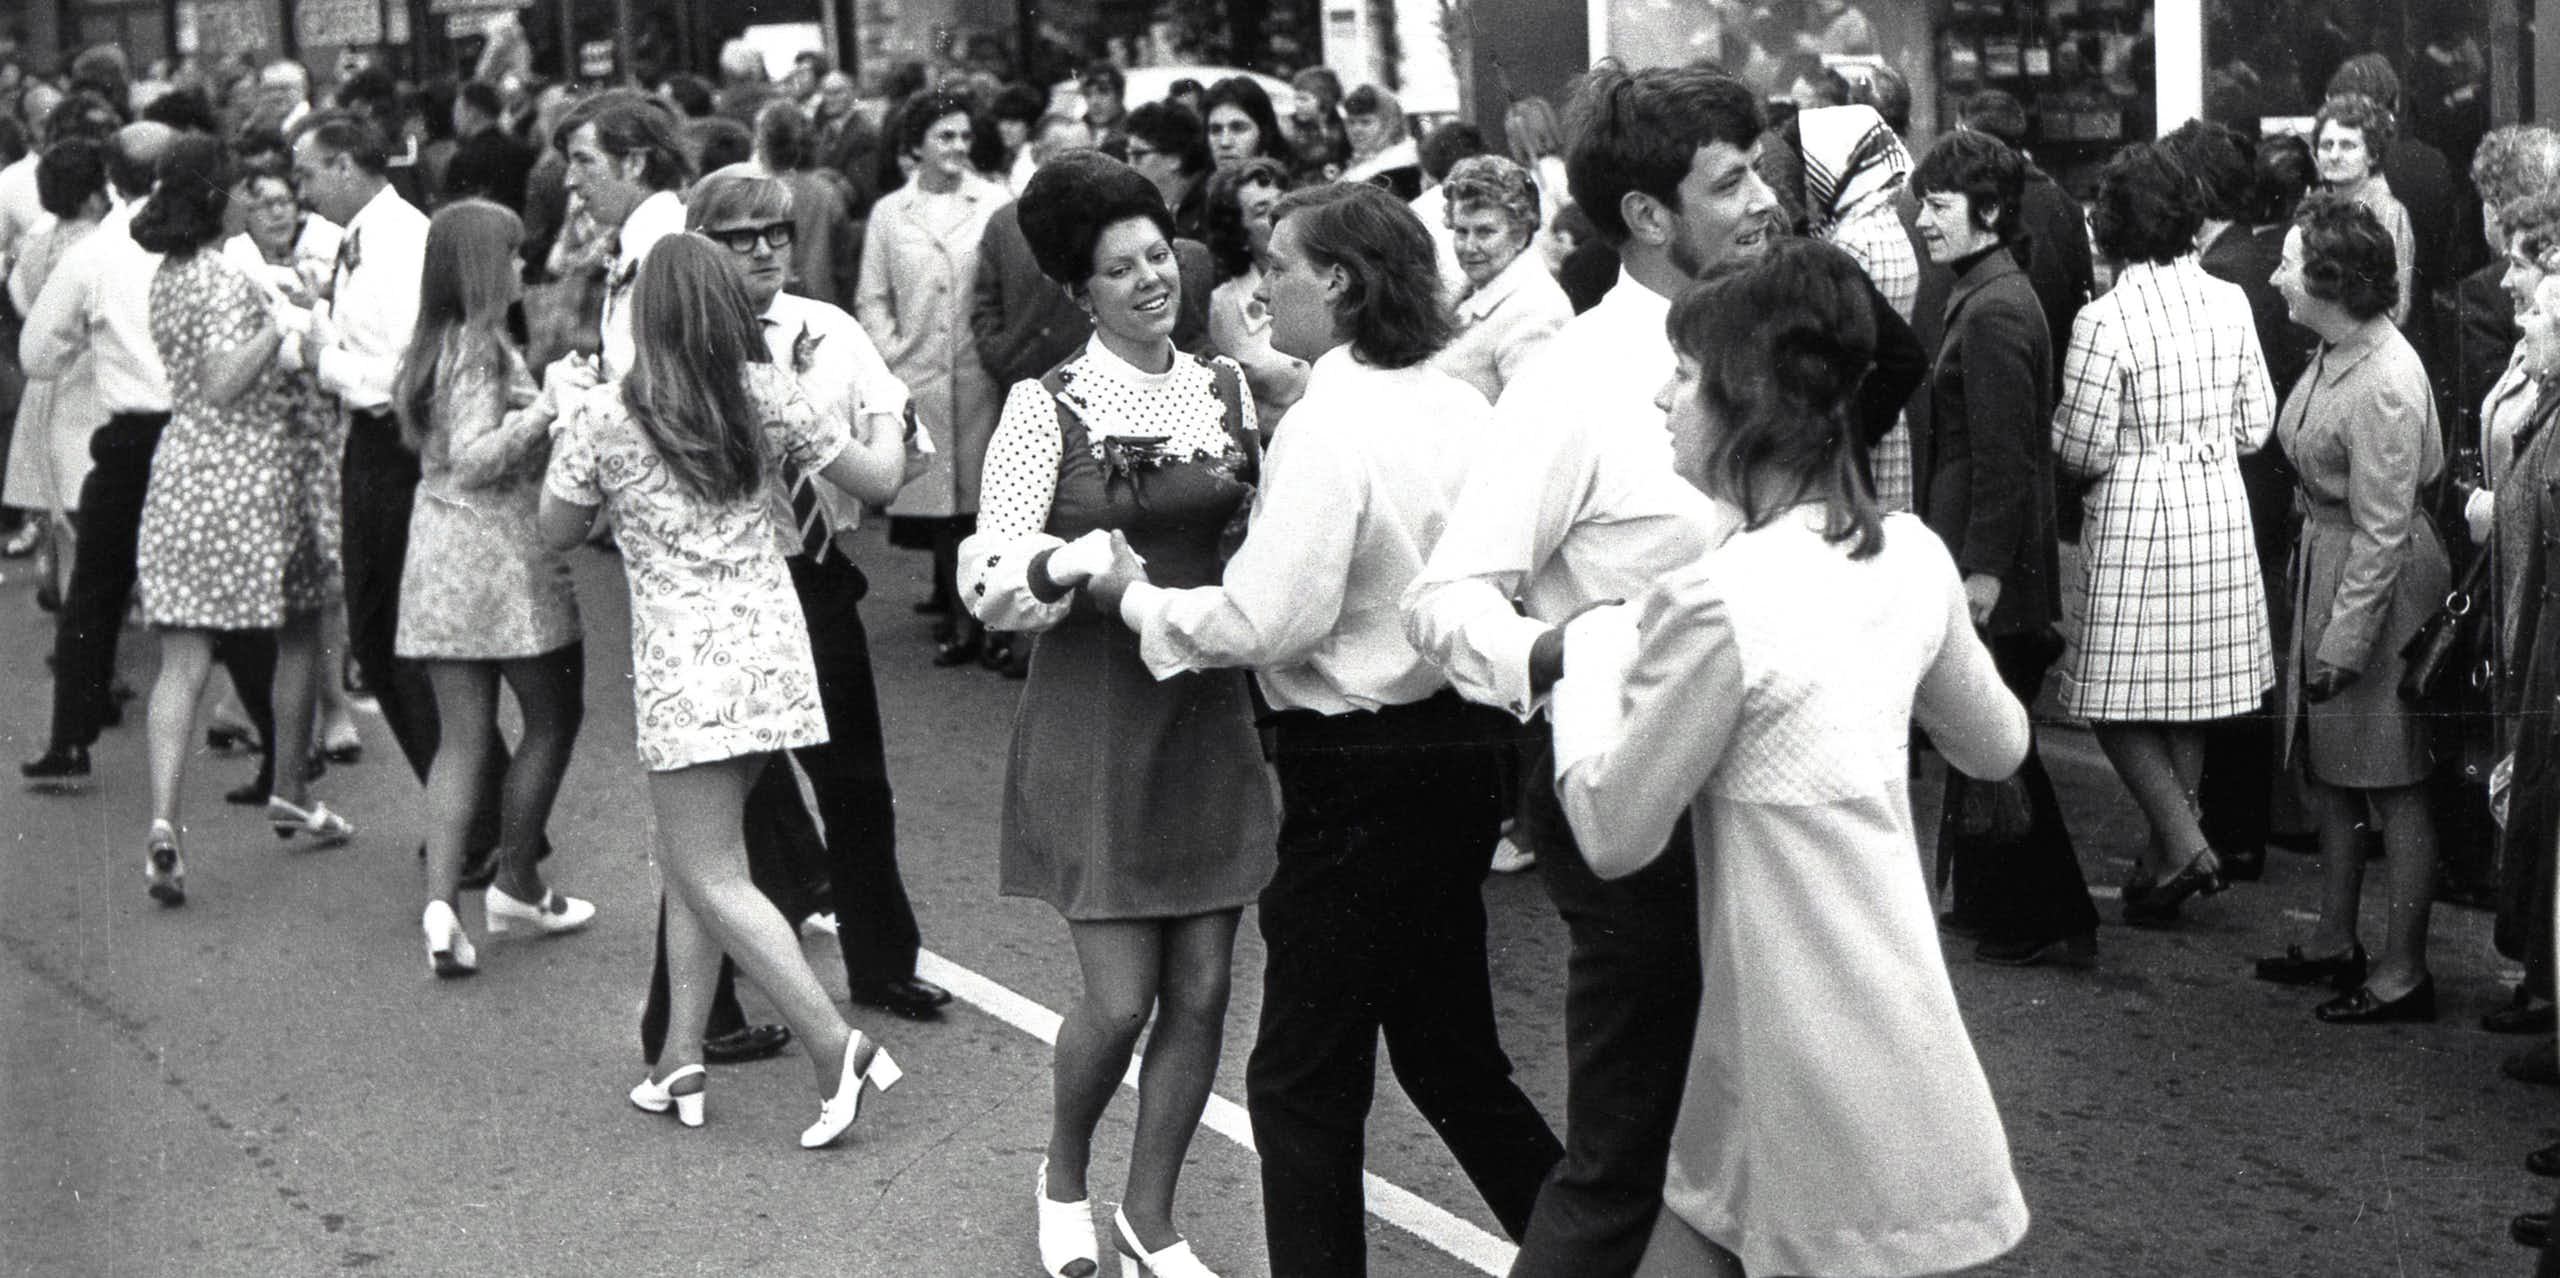 An archival black and white photograph of young people dancing in the street.